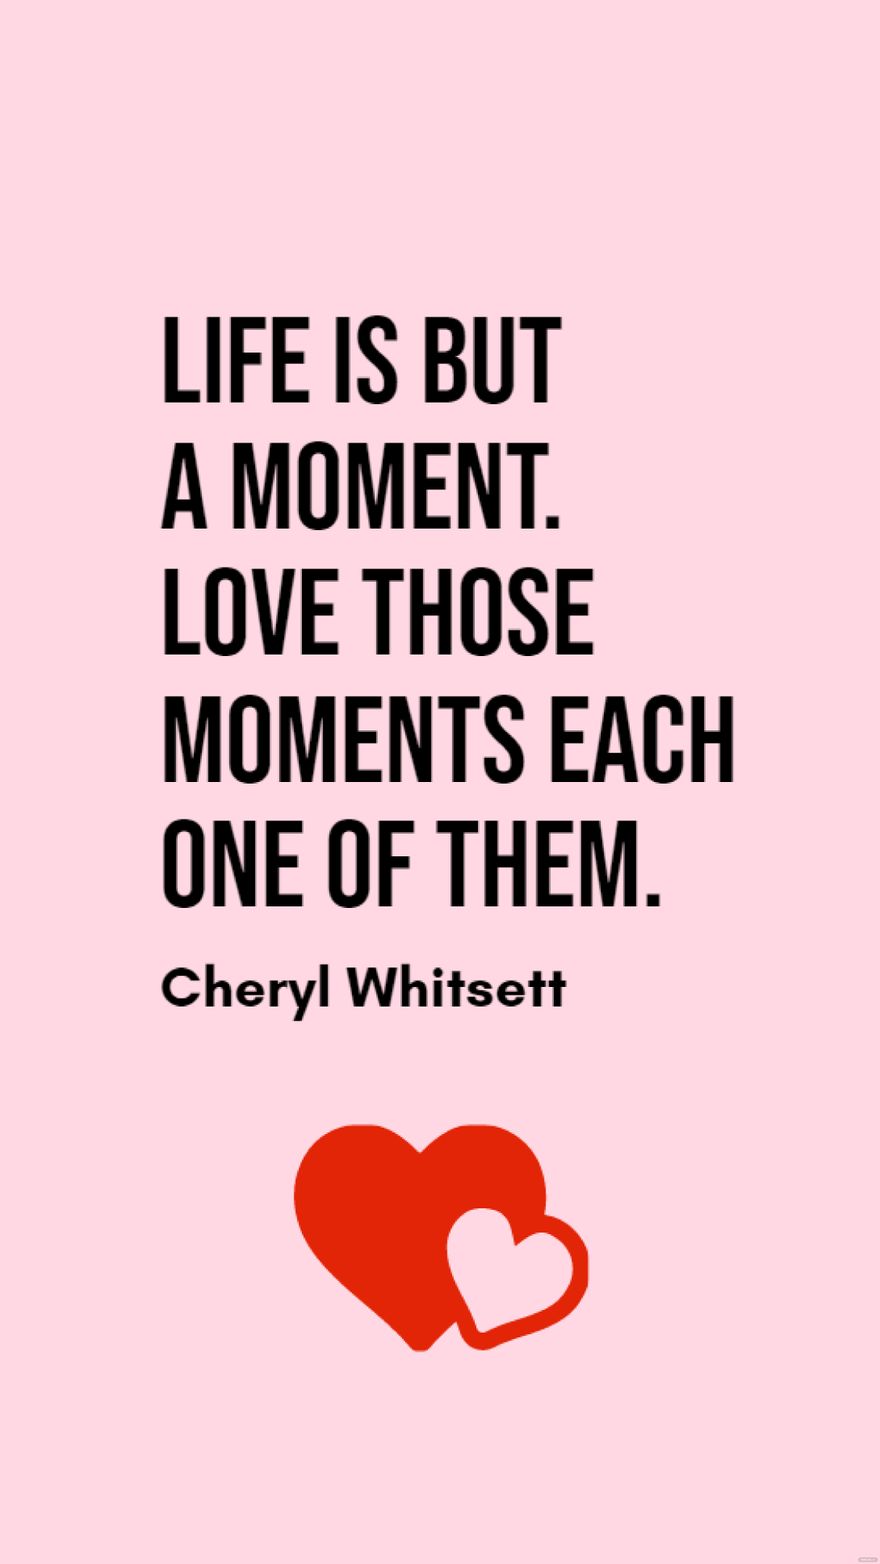 Cheryl Whitsett - Life is but a moment. Love those moments each one of them.